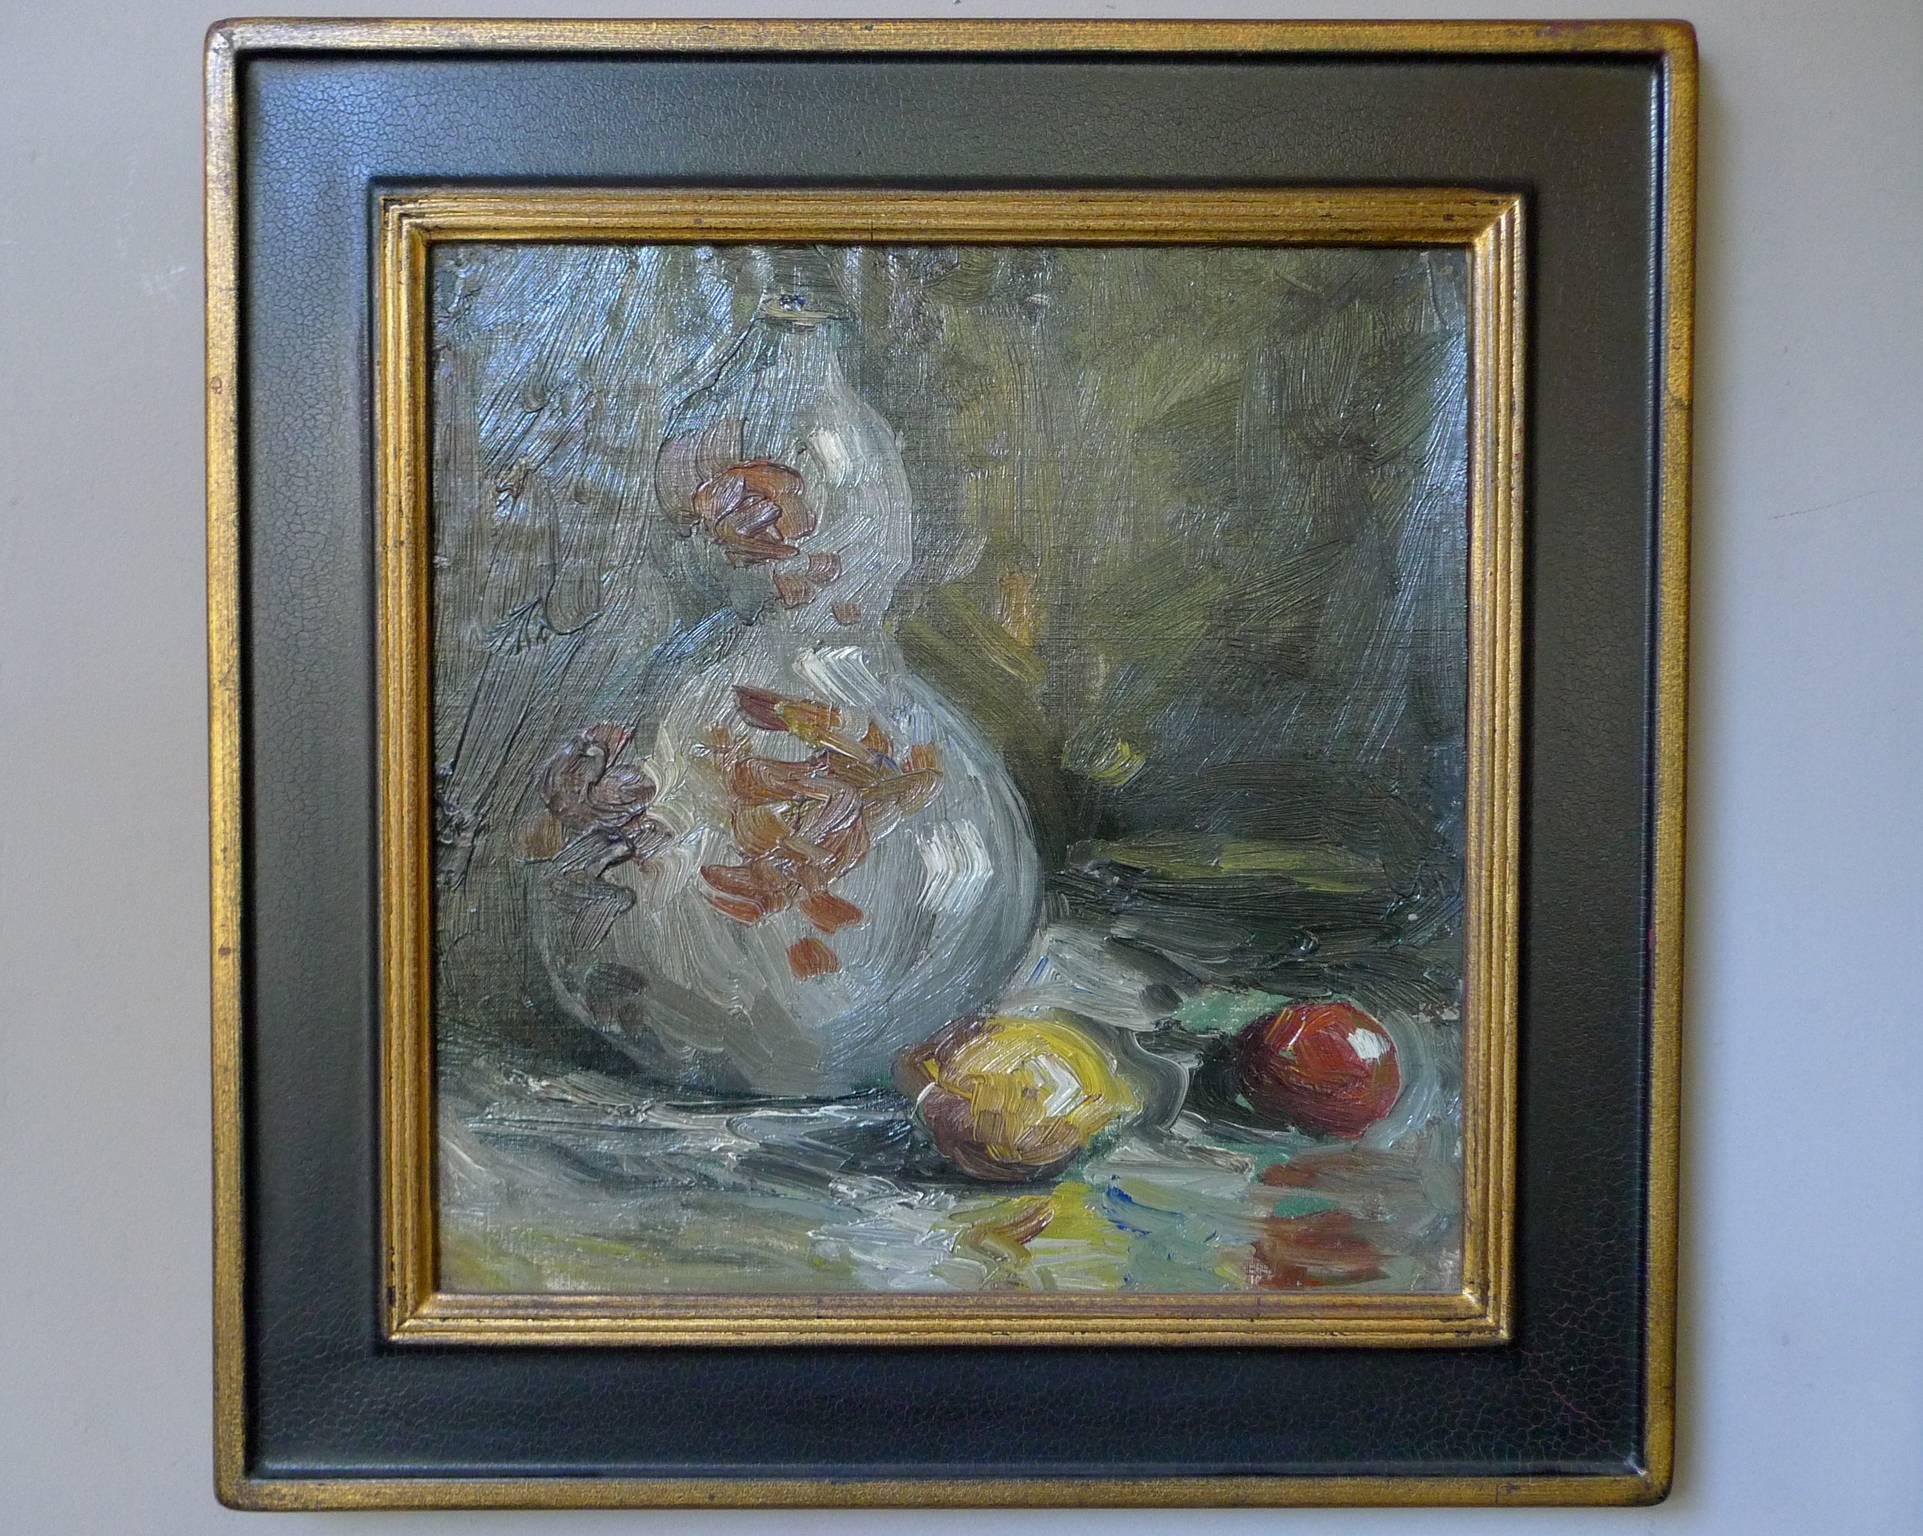 This still-life oil painting is by Merton Clivette (1868-1931), a distinguished artist, writer, and entertainer (among many of his talents). He is well-known for his expressionist paintings, with loose and dynamic brushwork. Clivette's work has been